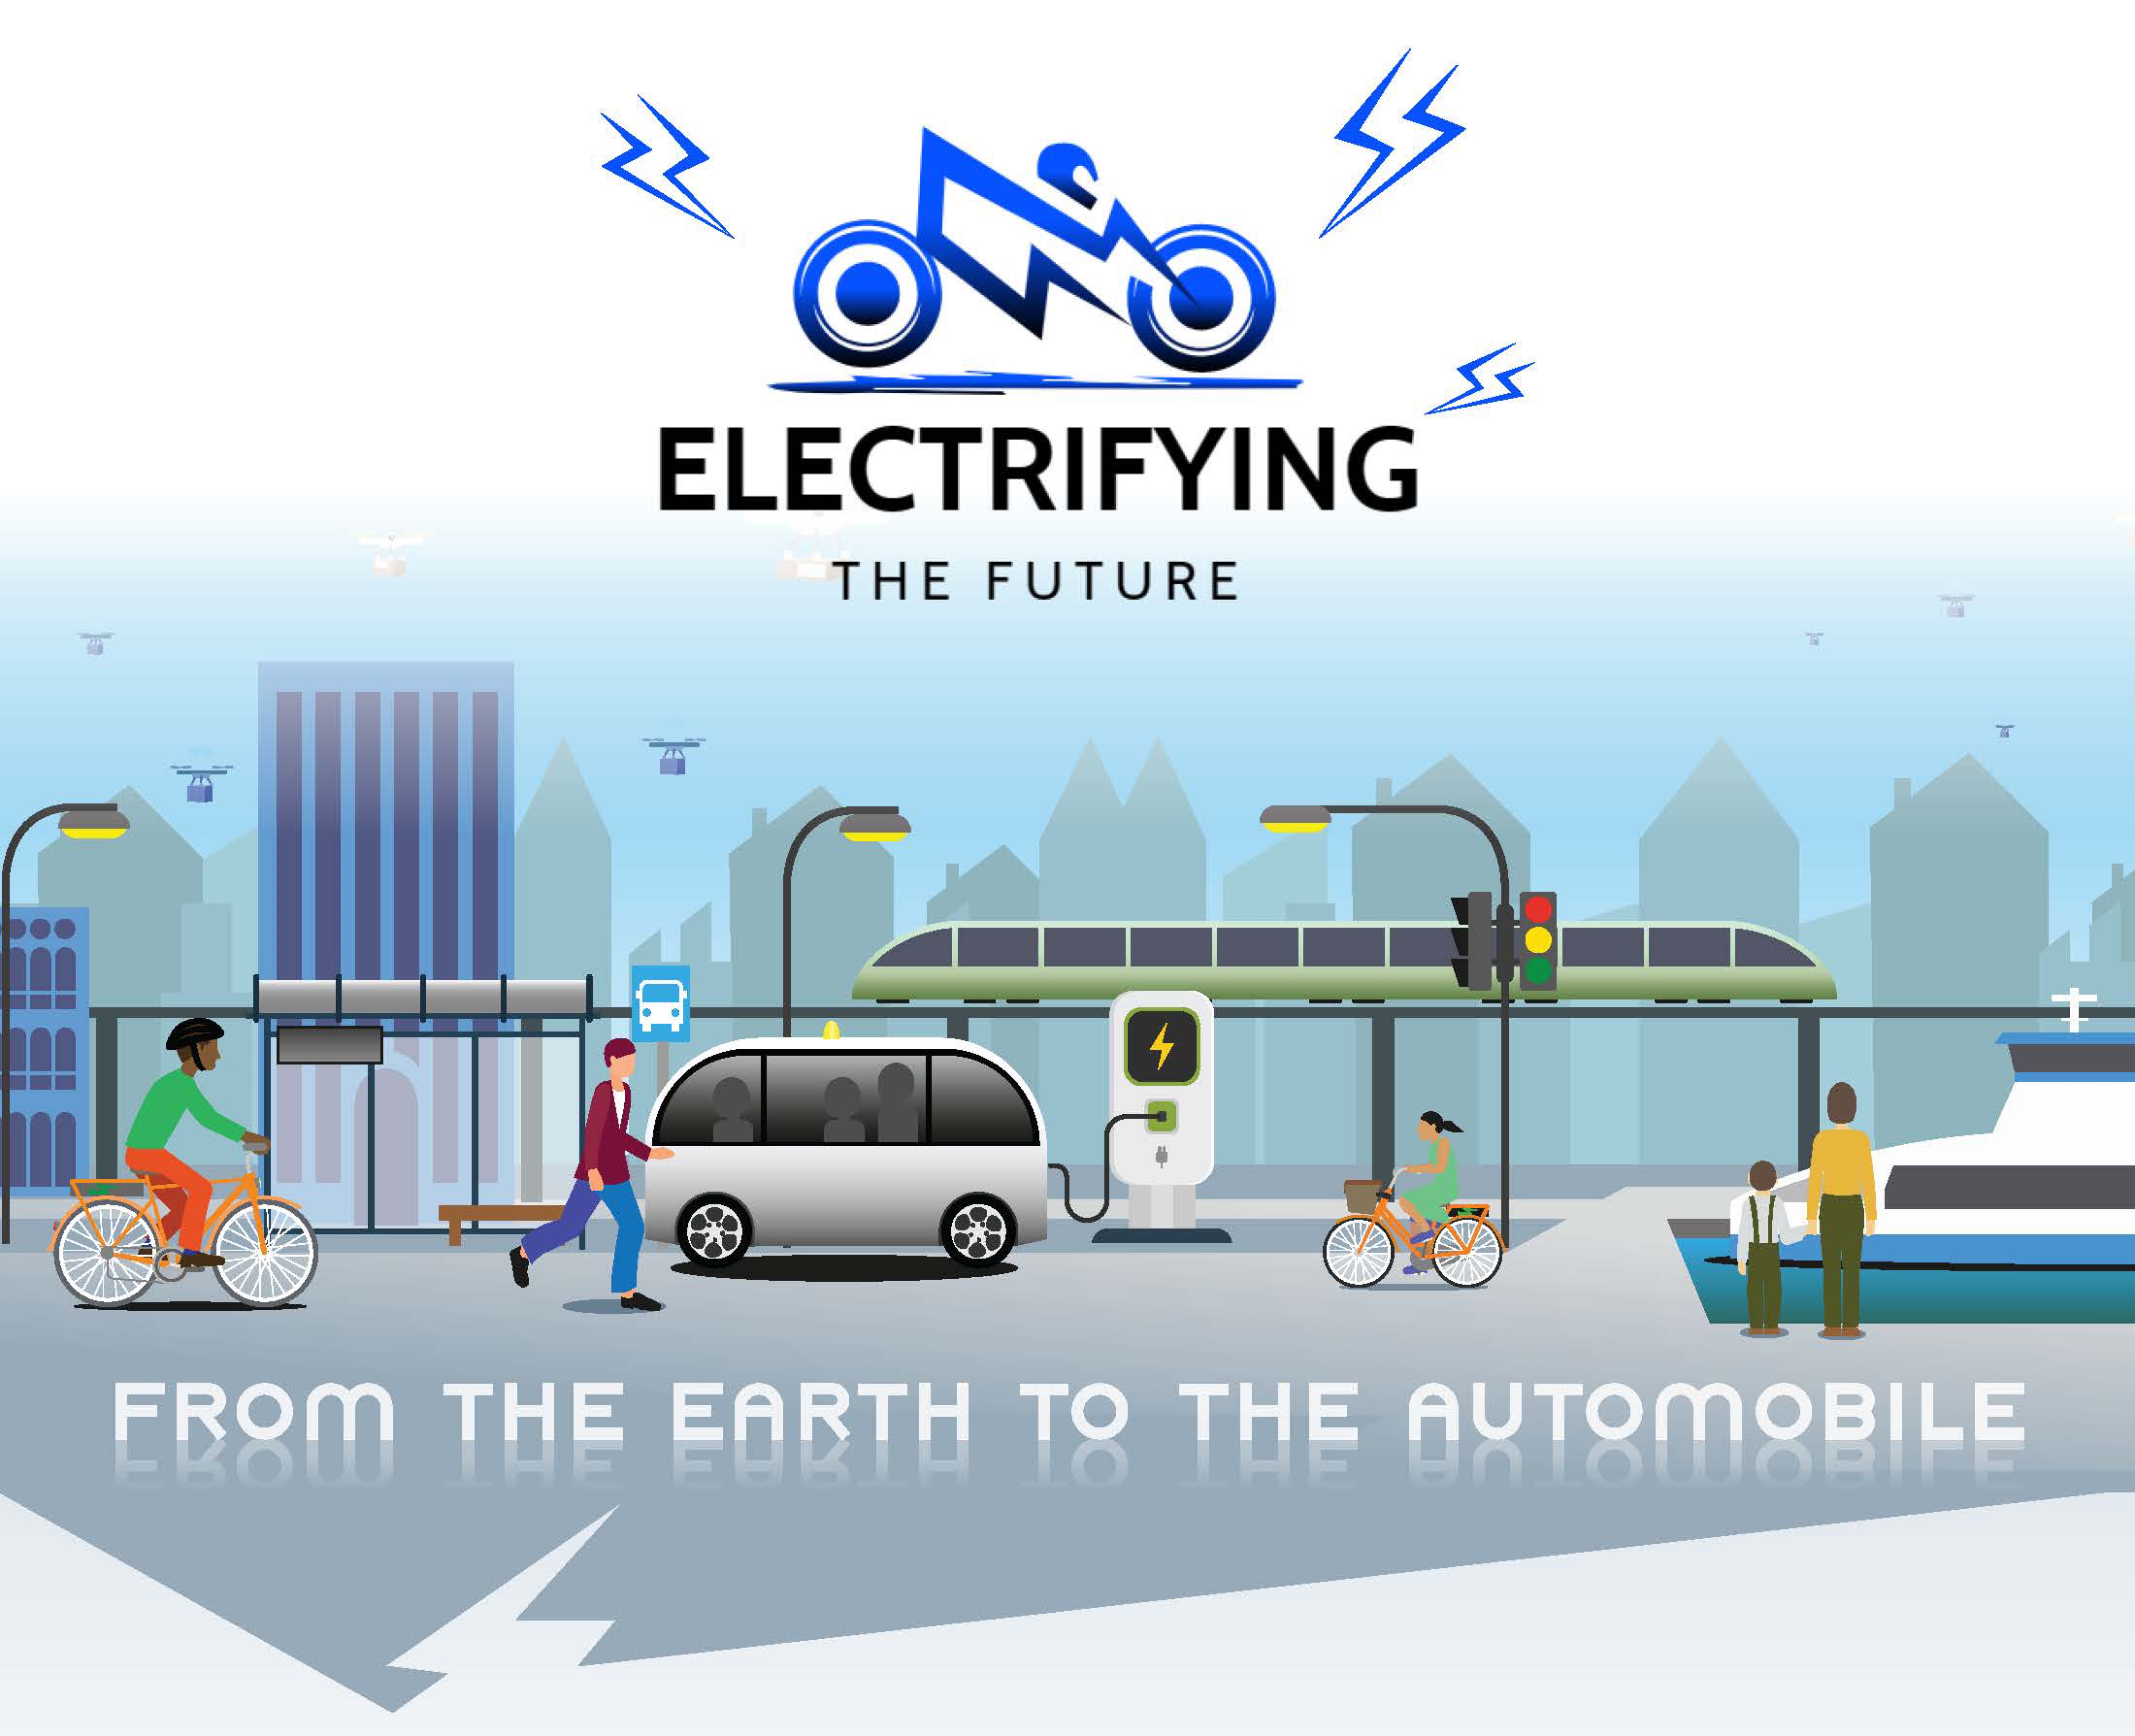 Electrifying The Future logo above the view of a sidewalk in the city with people on bicycles, a person walking, an electric vehicle pugged into an outlet and an electric train in the background, and "From The Earth To The Automobile” displayed on the road.